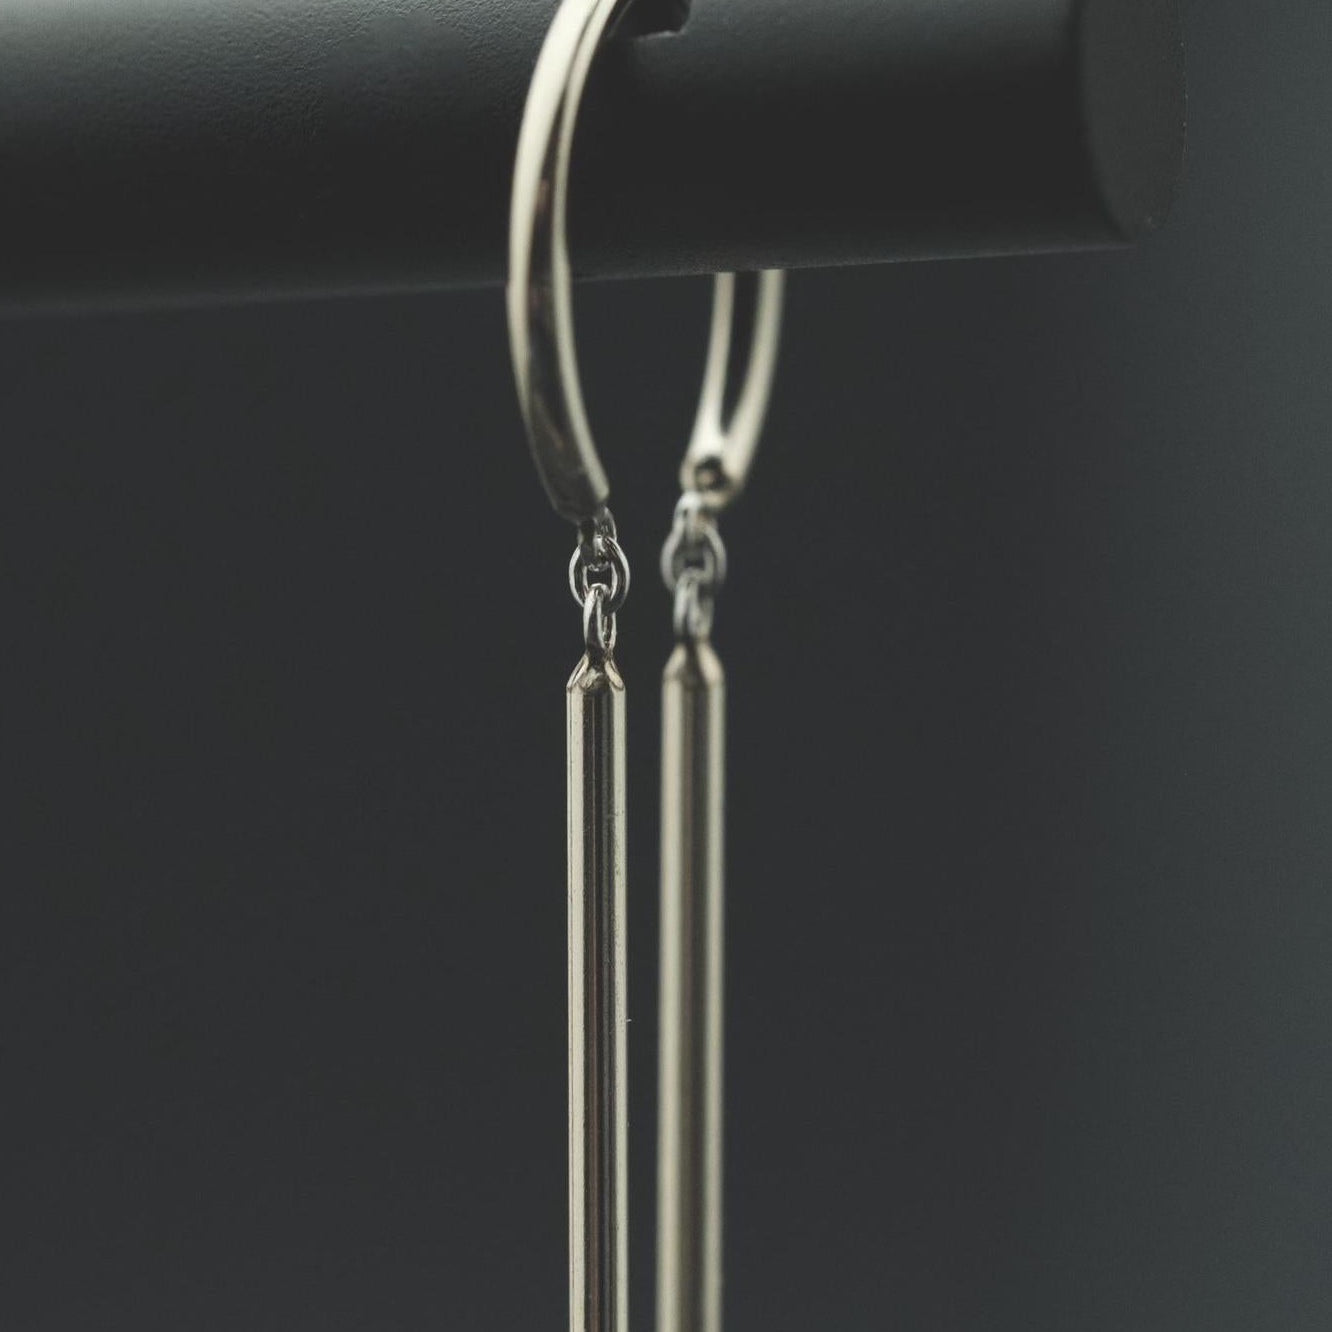 Chime Earring in 14k White Gold by Jack + G